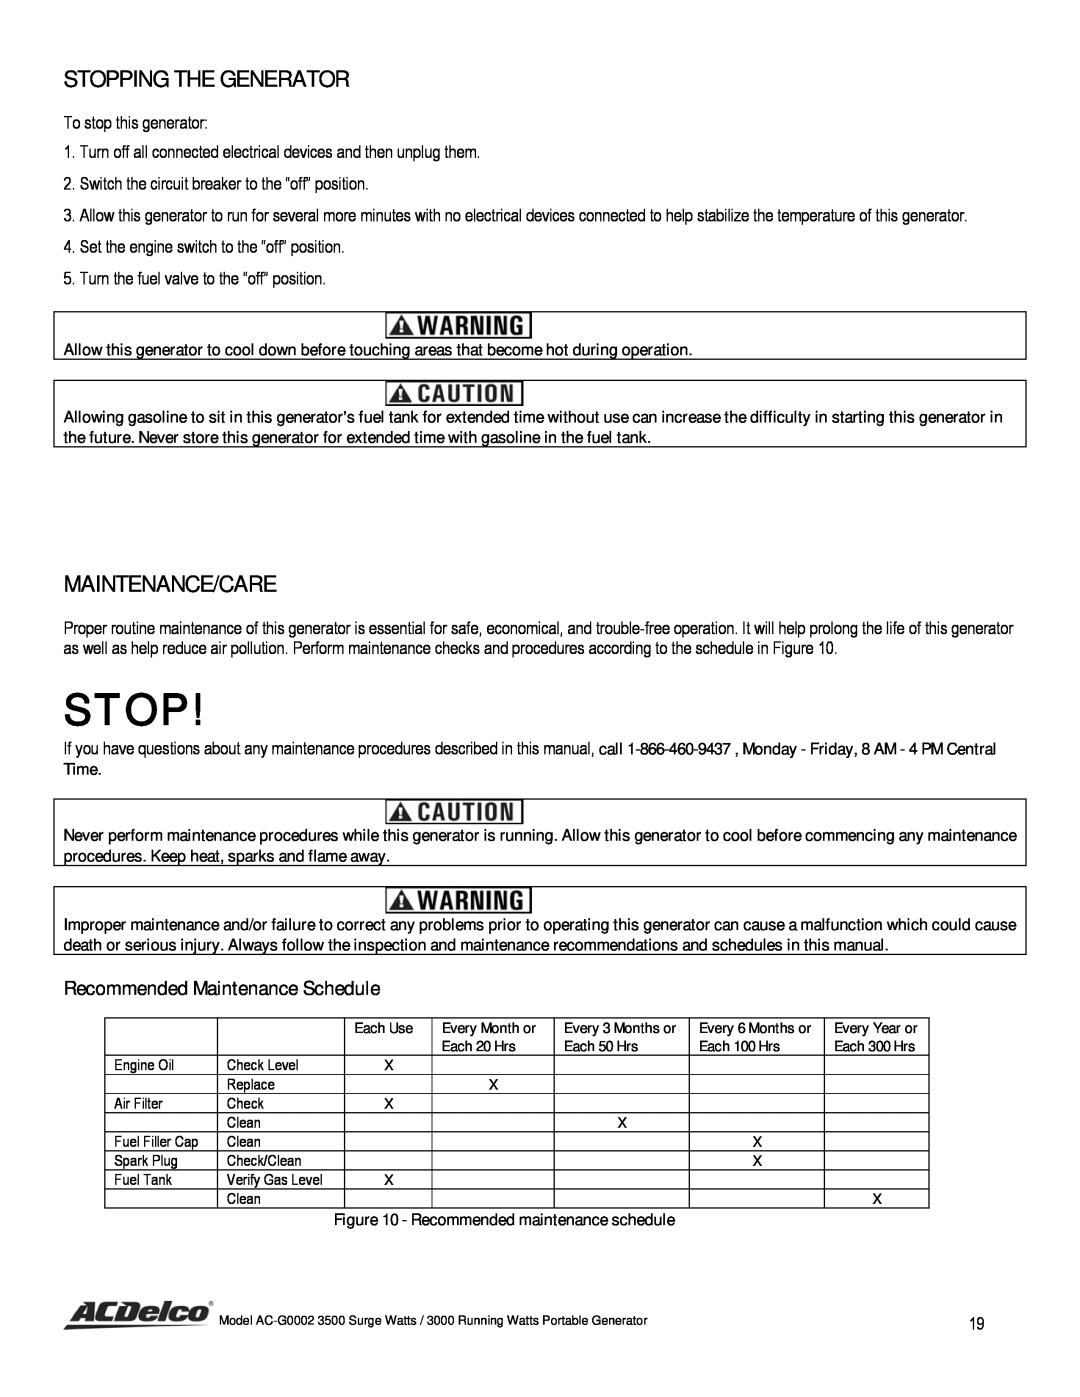 ACDelco AC-G0002 instruction manual Stopping The Generator, Maintenance/Care, Recommended Maintenance Schedule, Time 